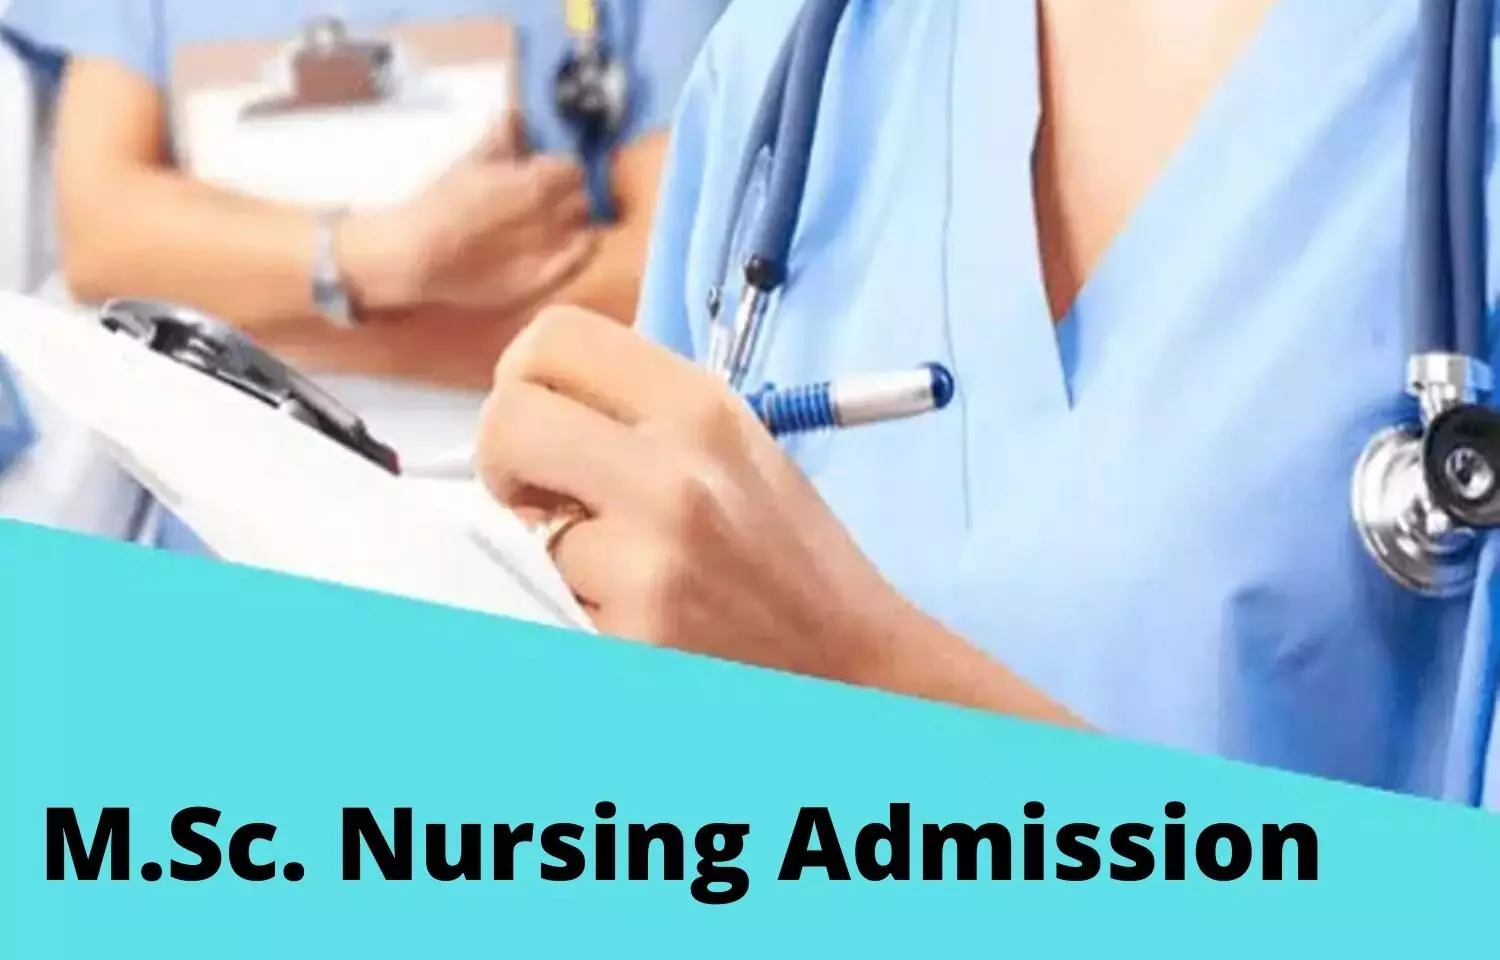 MSc Nursing Admissions: BOPEE issues reporting instructions for candidates, Details